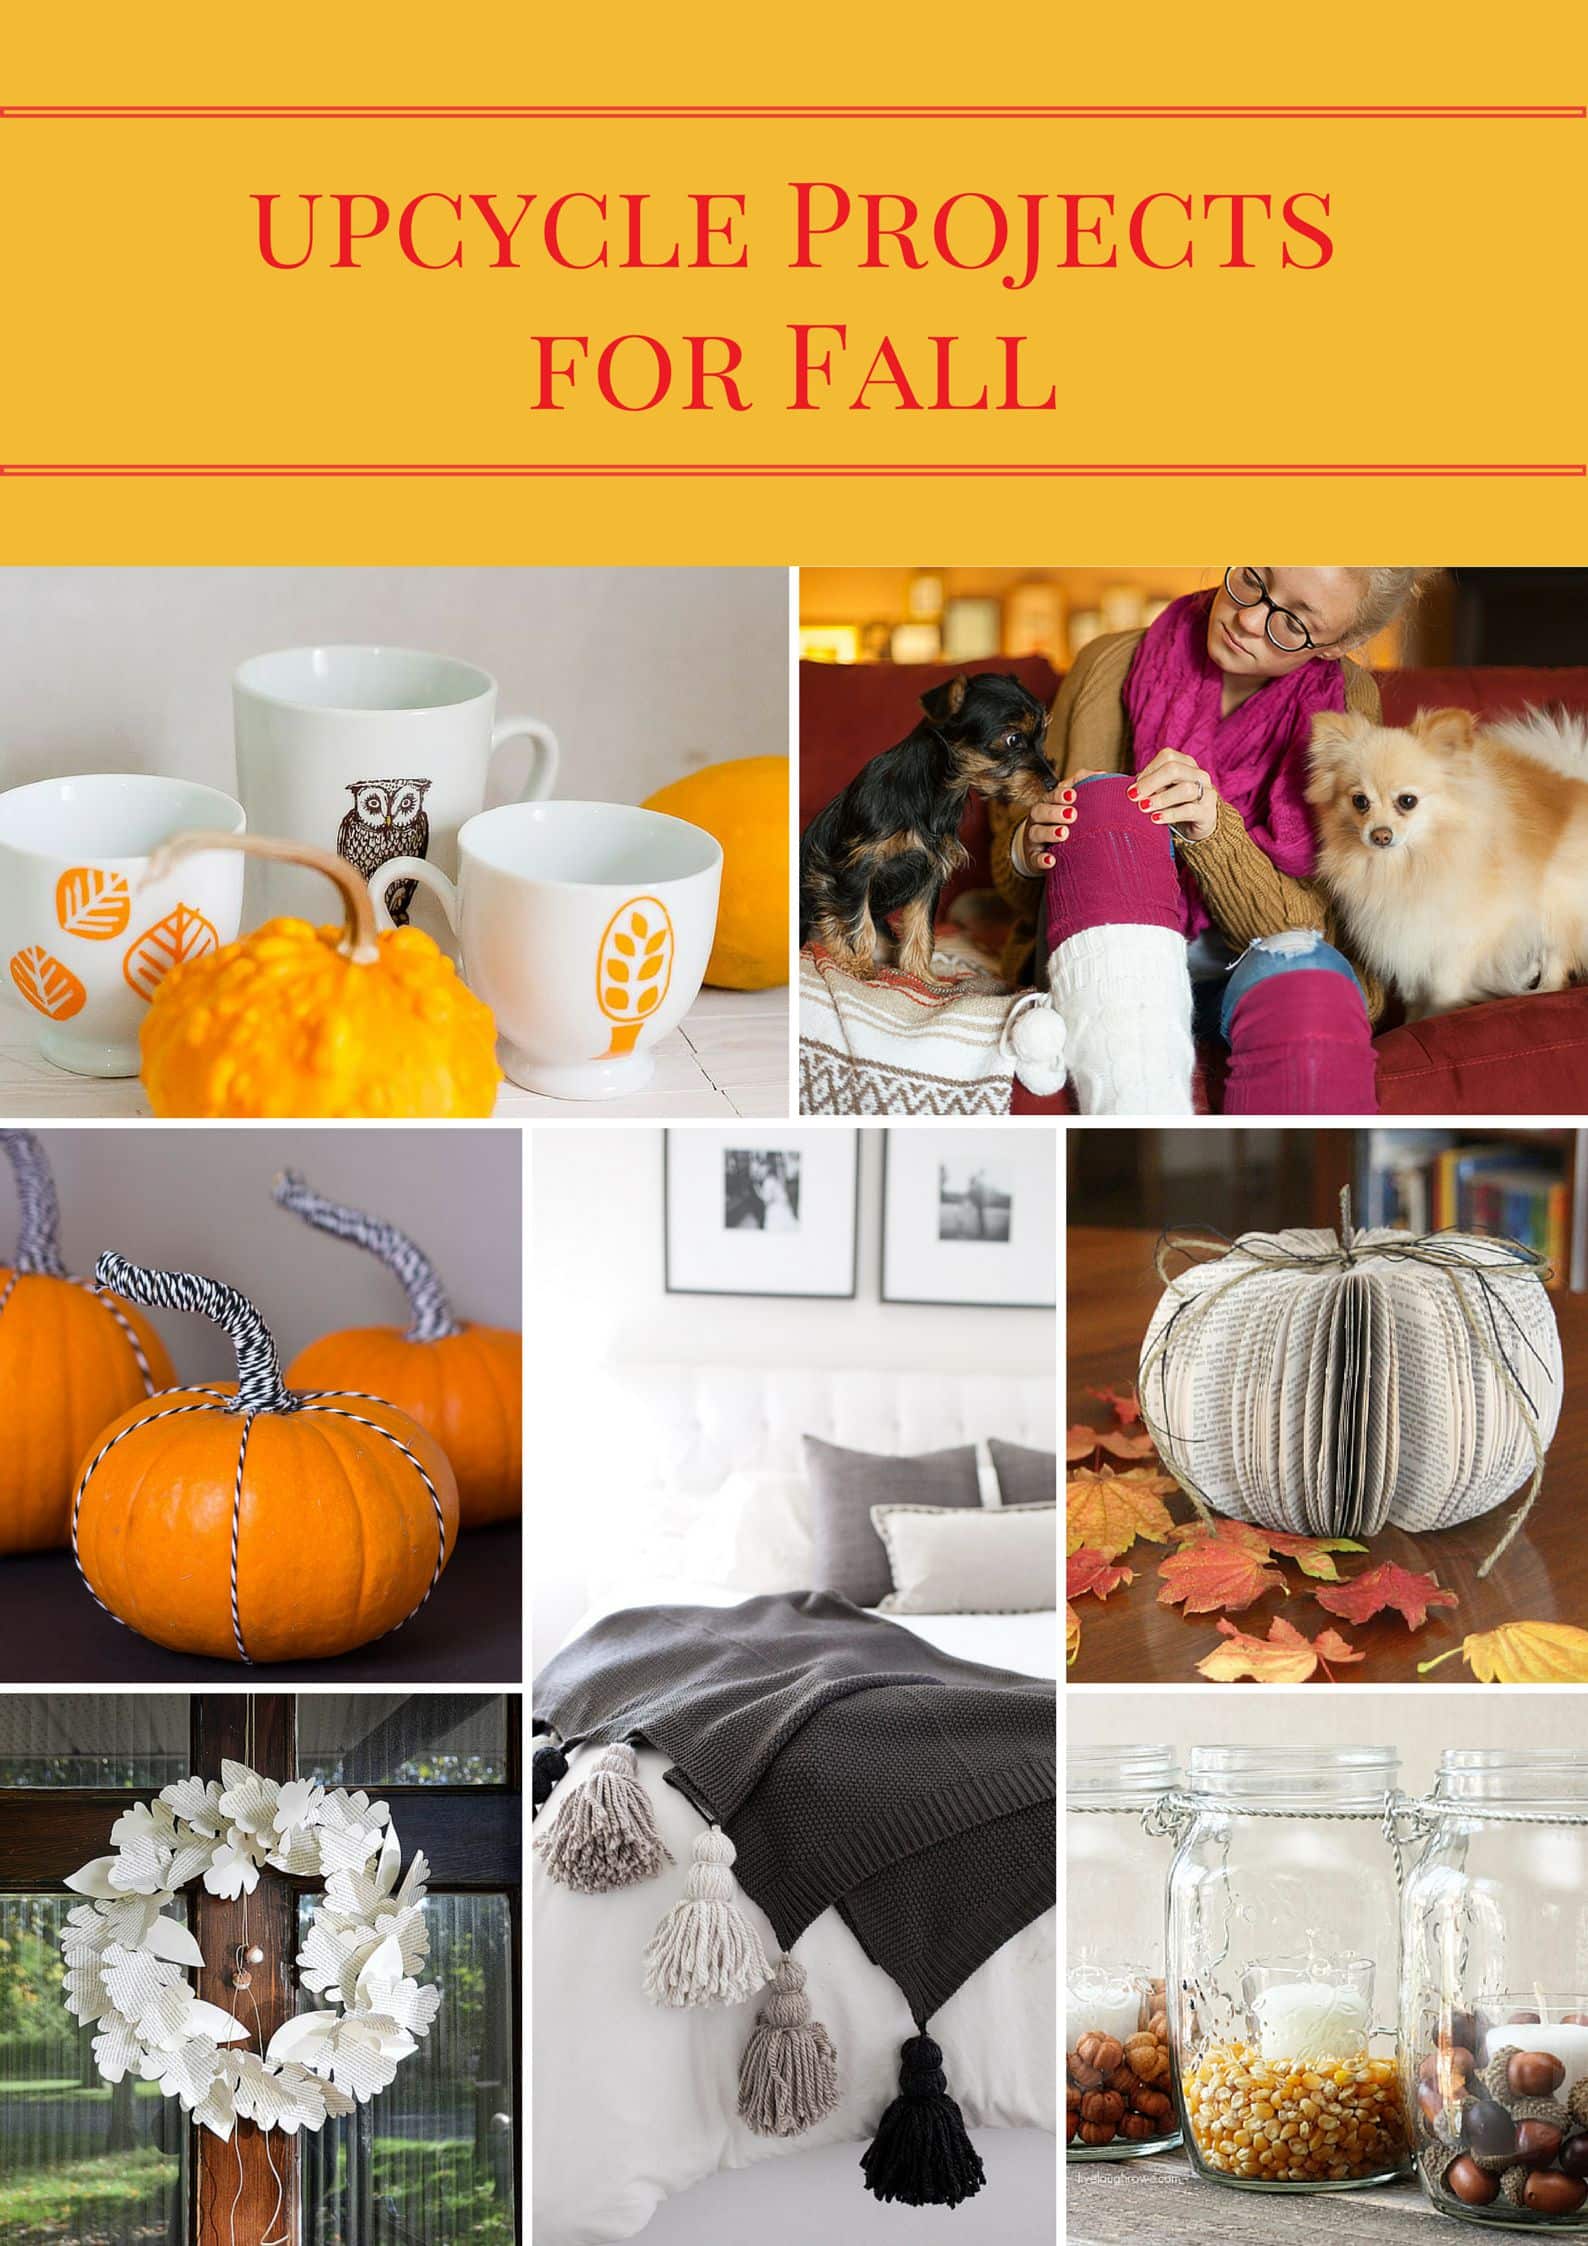 7 Easy Upcycle Projects for Fall